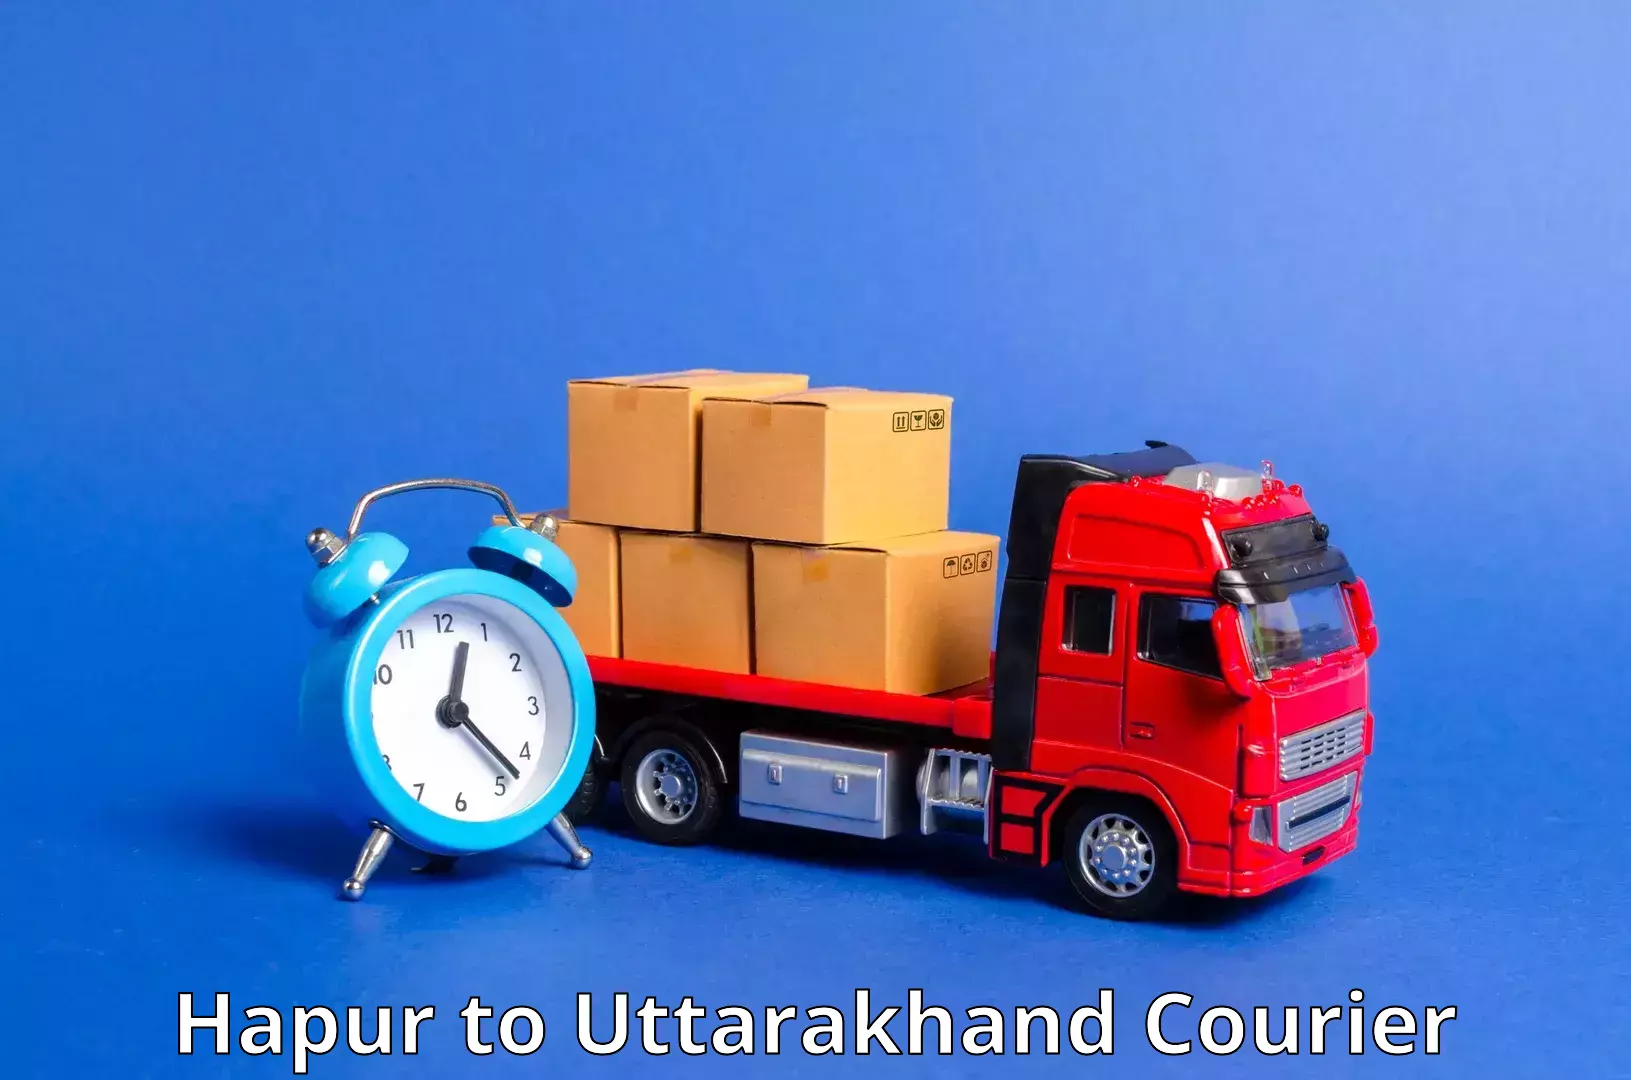 Next-day delivery options Hapur to Bhagwanpur